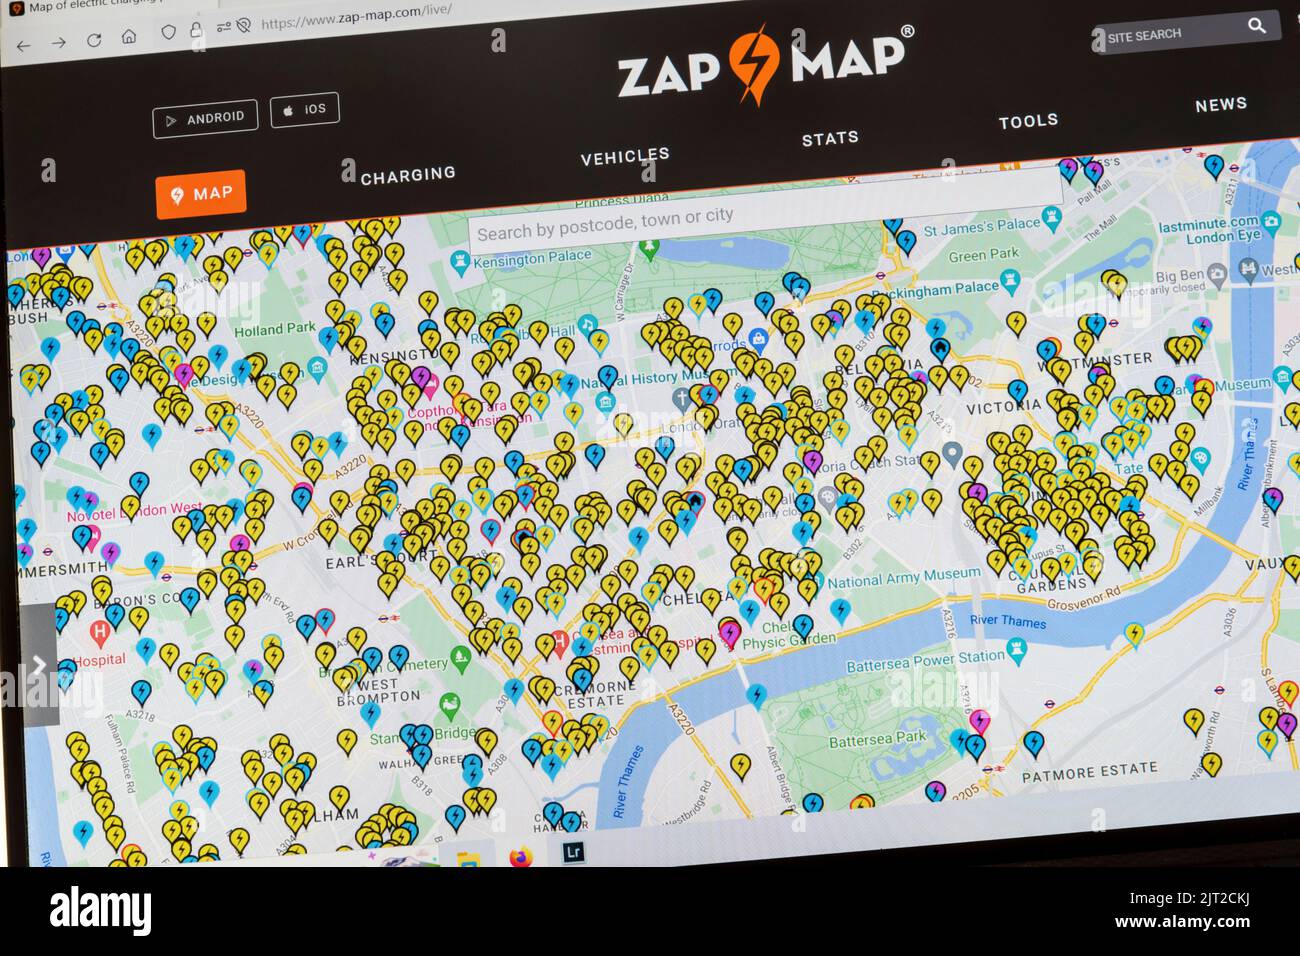 Zap Map website showing the location of EV charging points across central London. Stock Photo